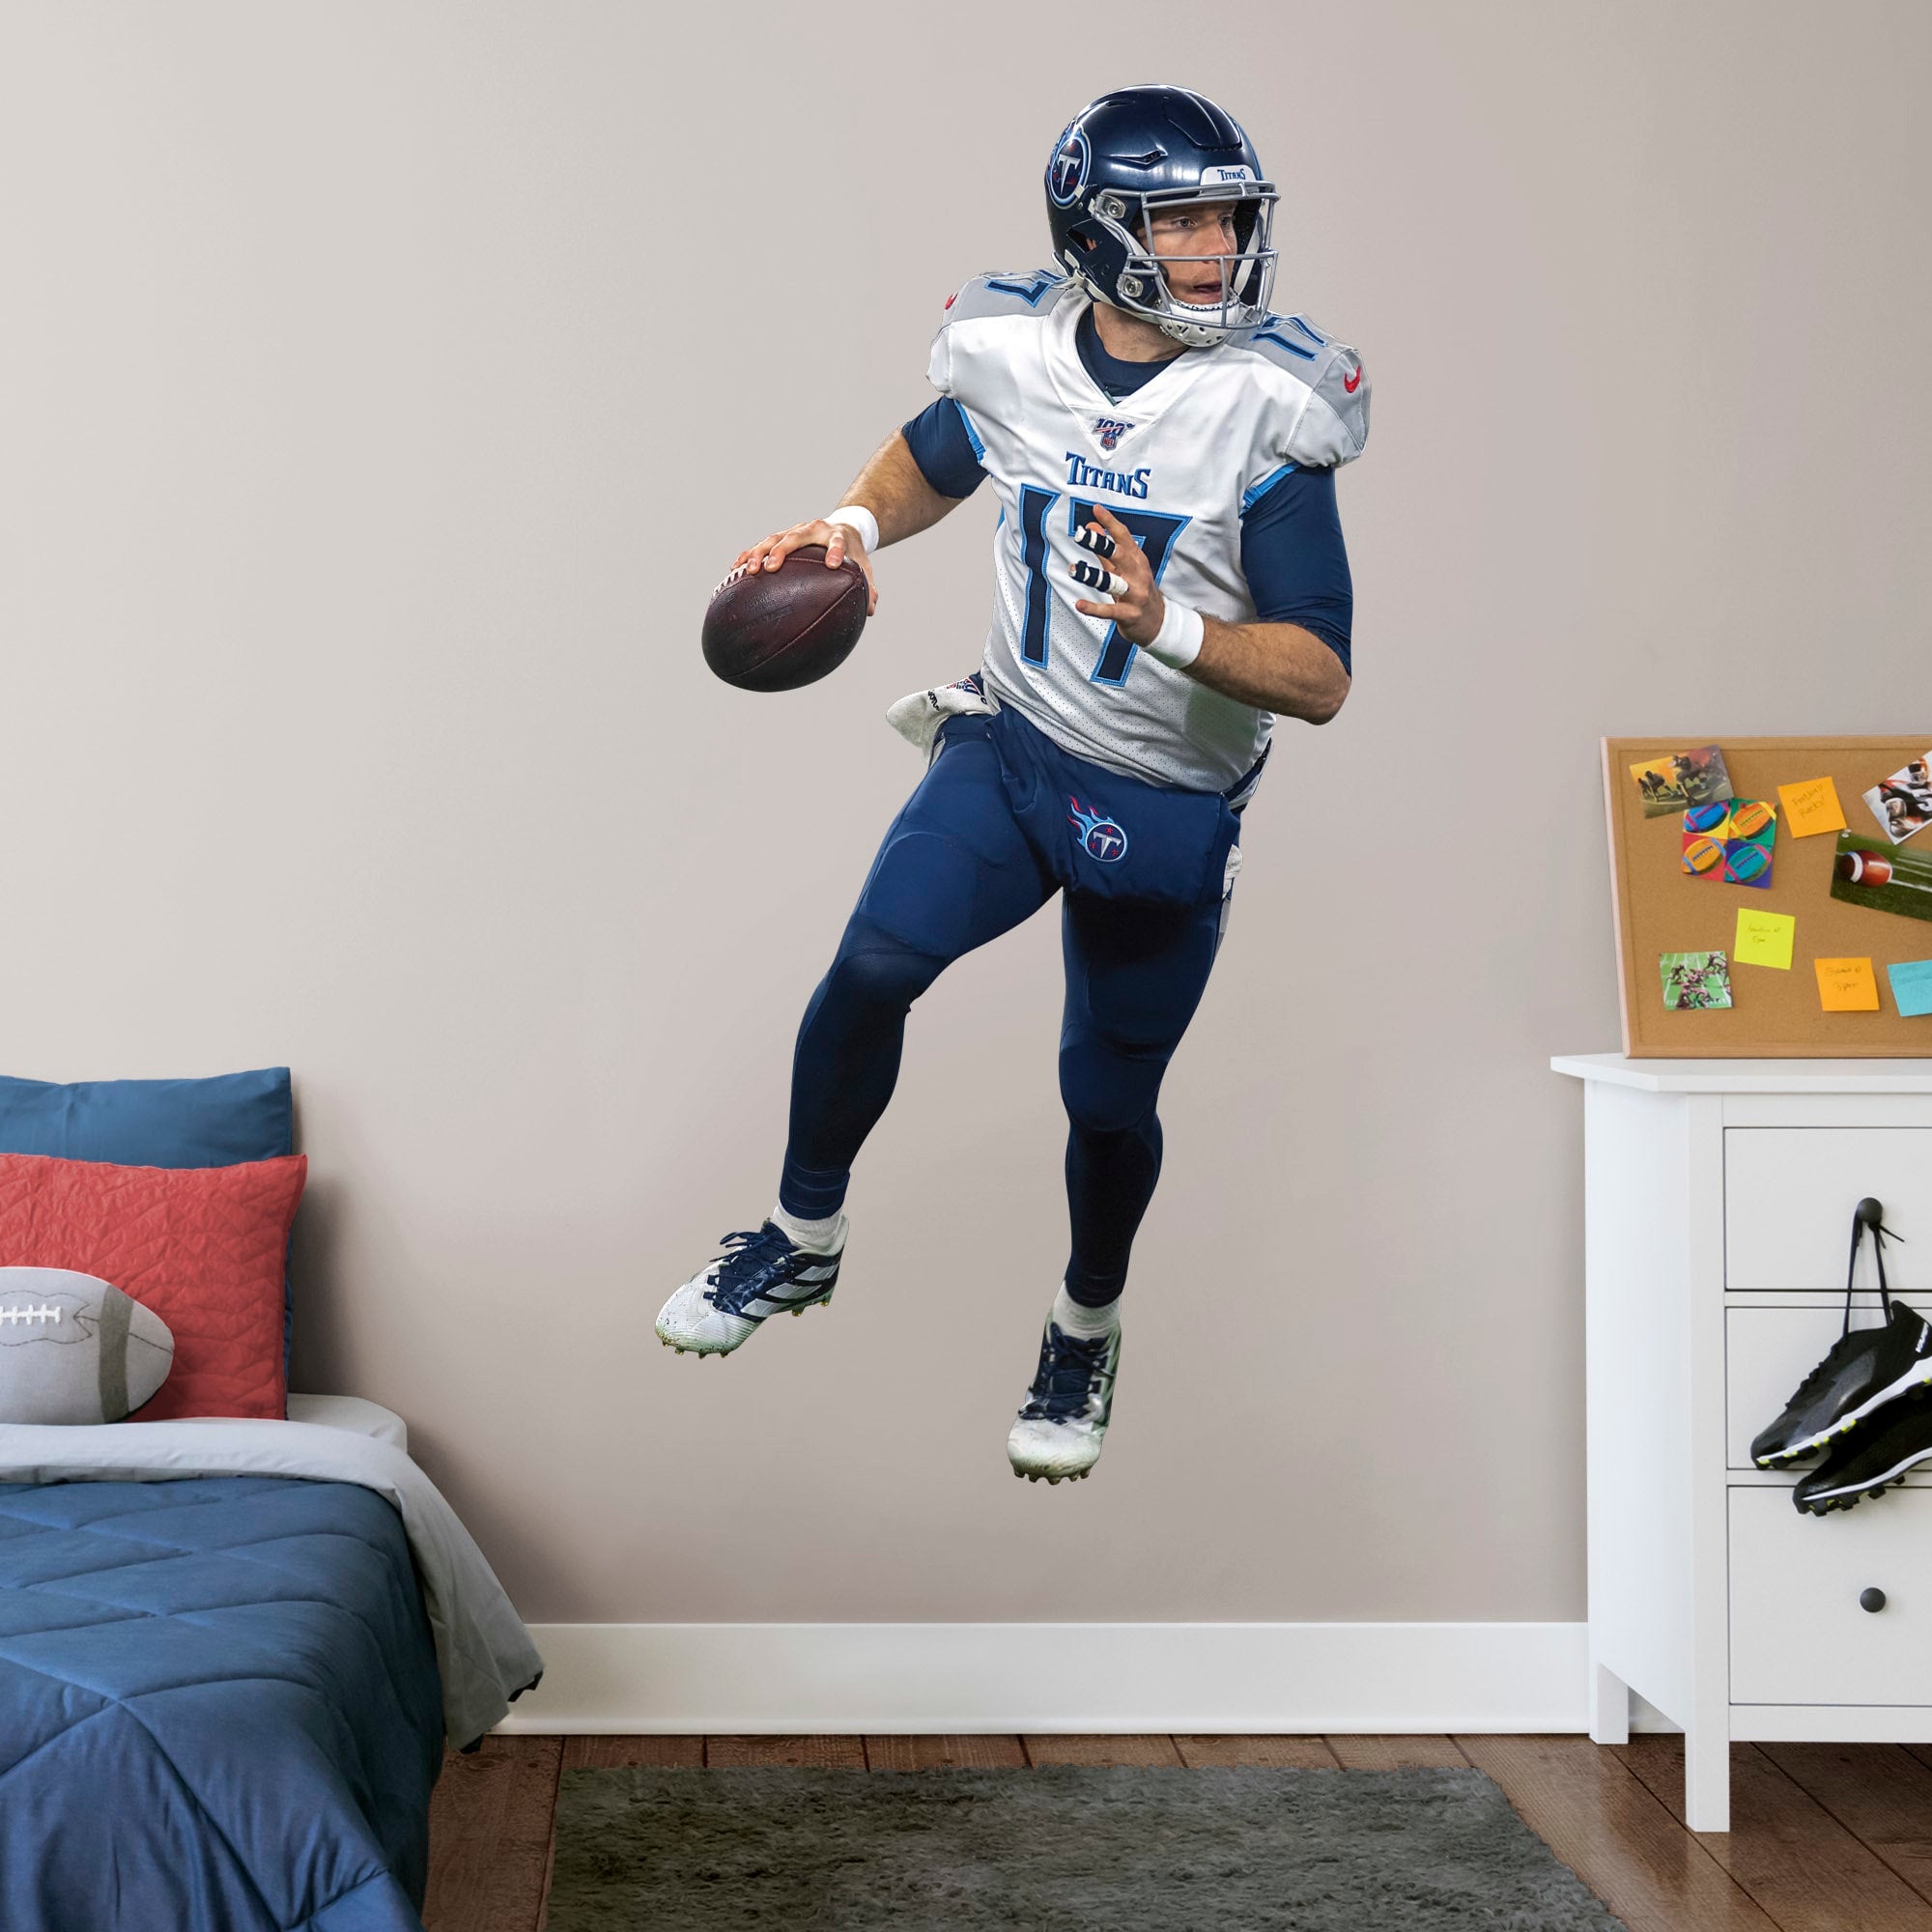 Ryan Tannehill for Tennessee Titans - Officially Licensed NFL Removable Wall Decal Life-Size Athlete + 2 Decals (40"W x 78"H) by